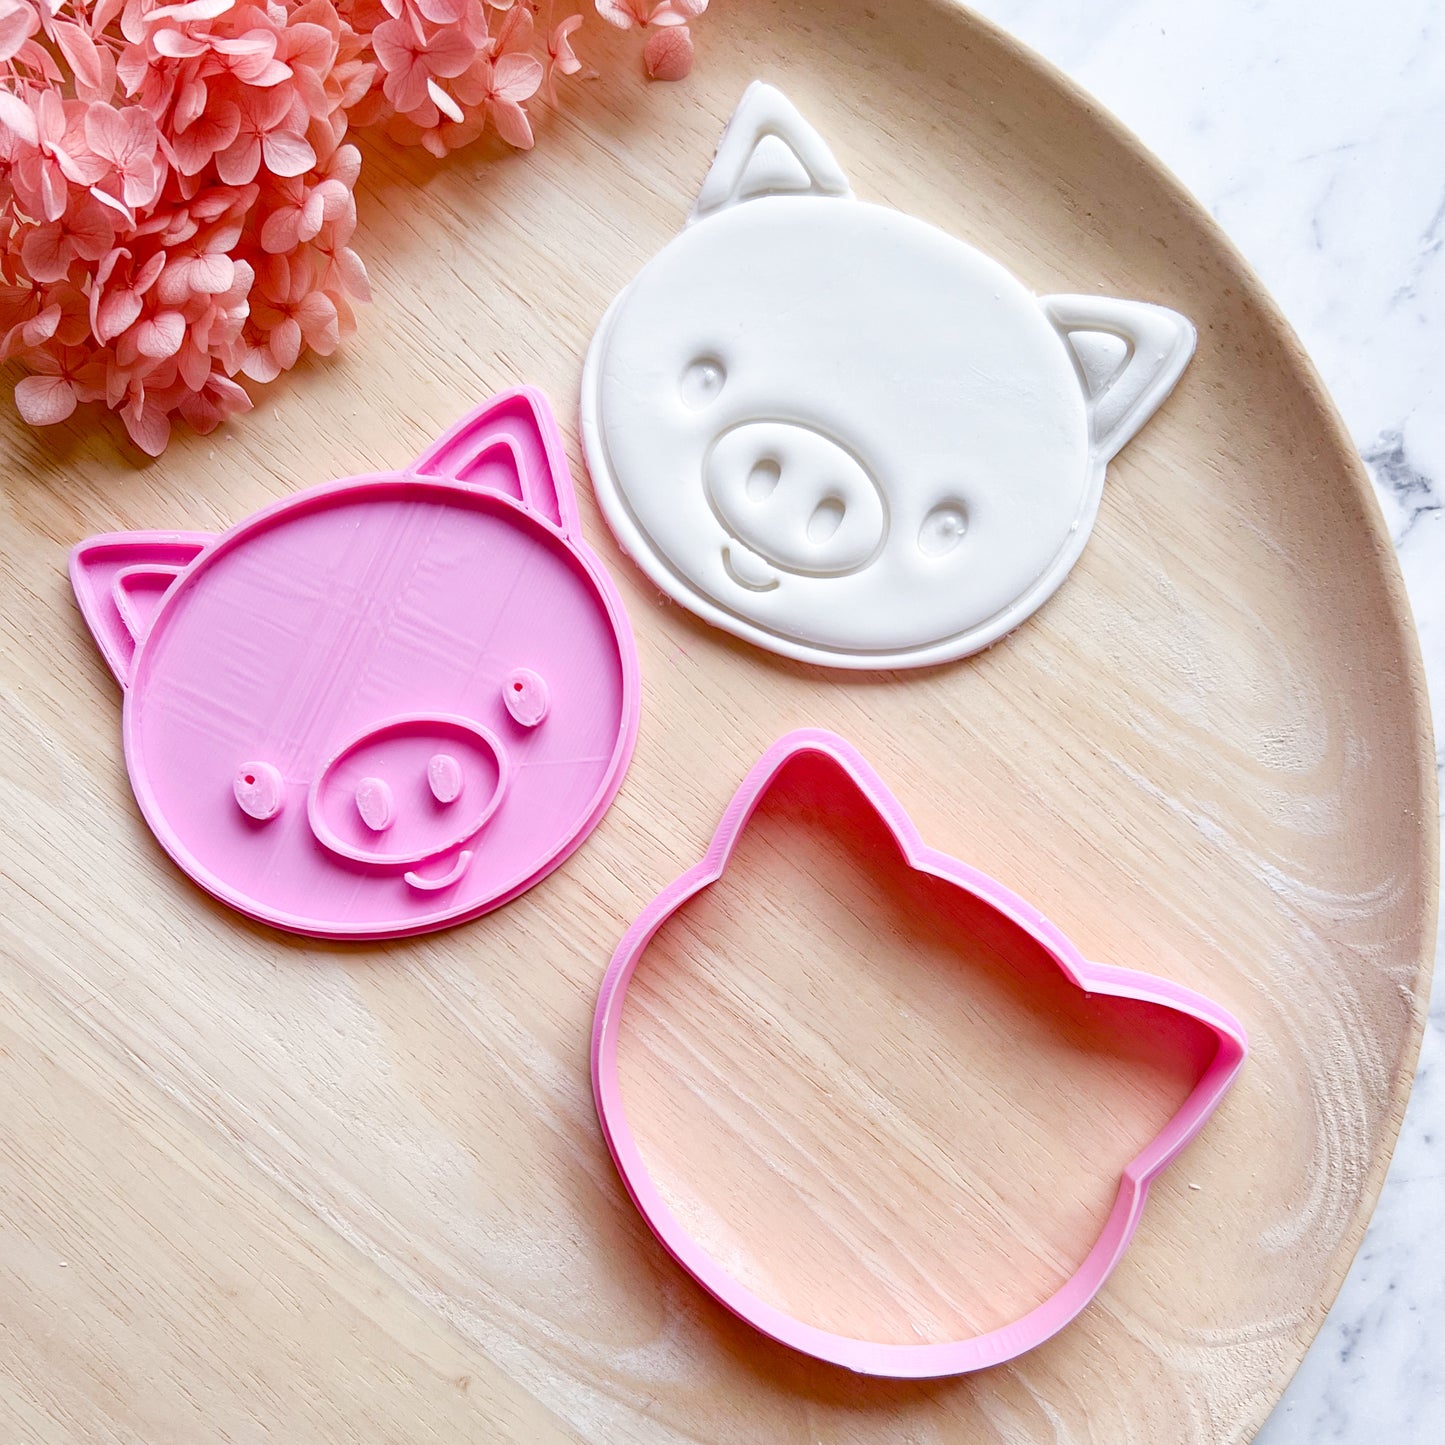 Baby Pig Cookie Cutter & Stamp